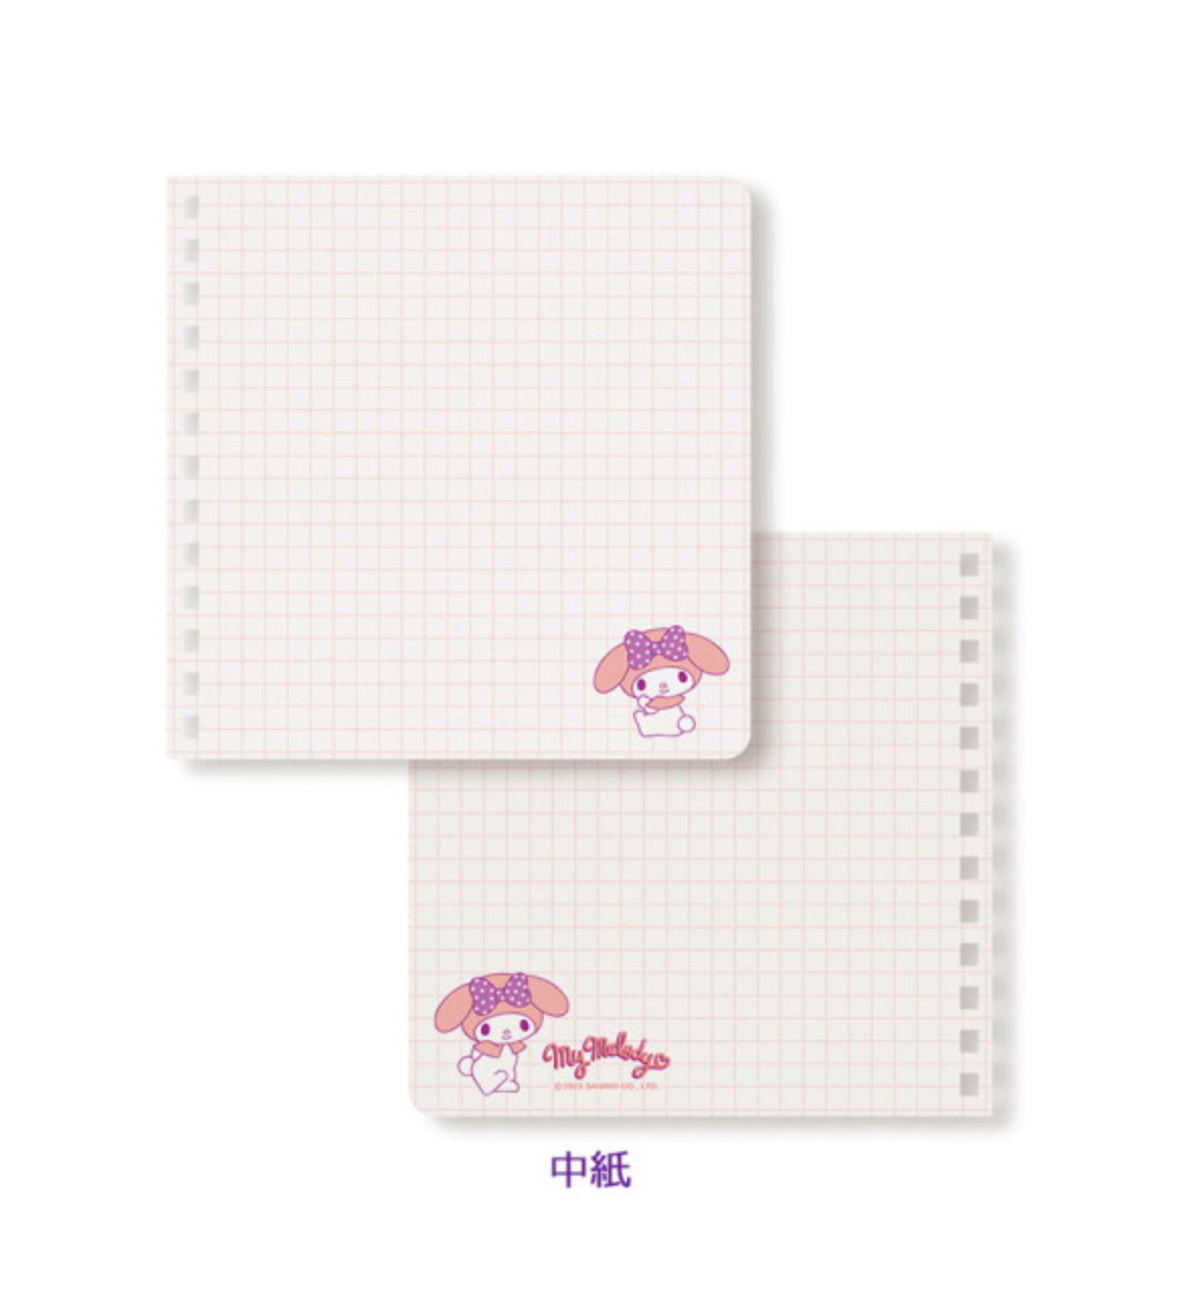 Sanrio City Pop Square Ring Notebook [My Melody]